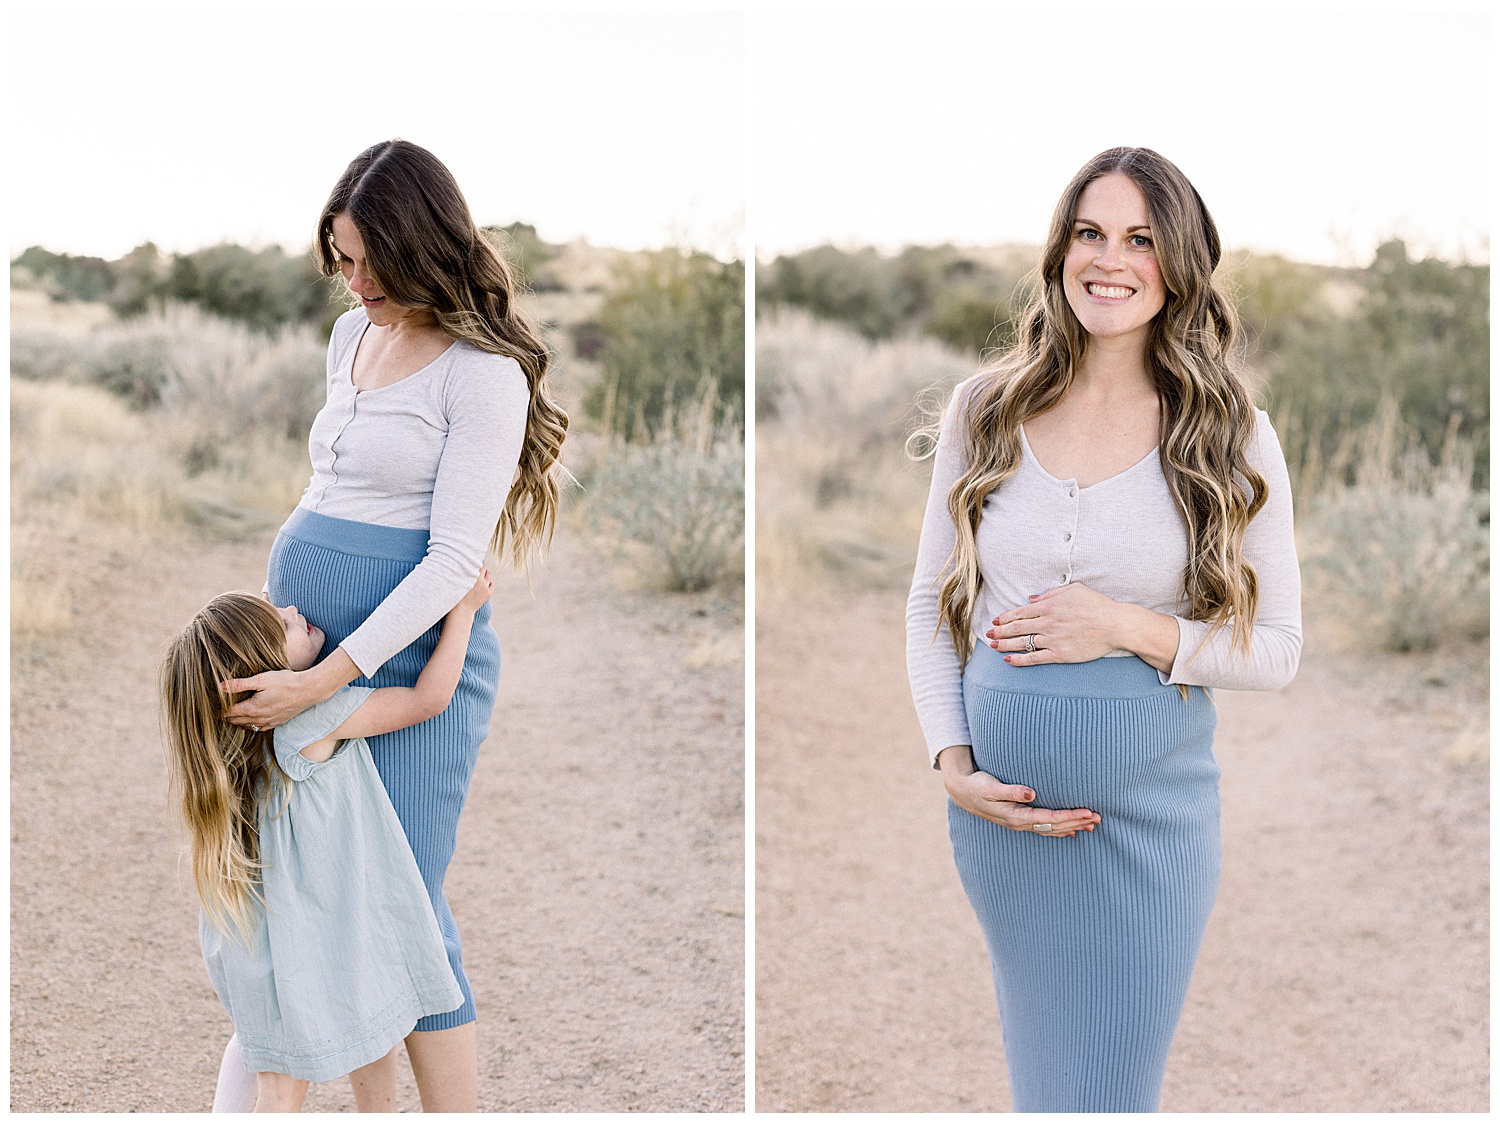 Maternity Session in Scottsdale Arizona, mommy and me